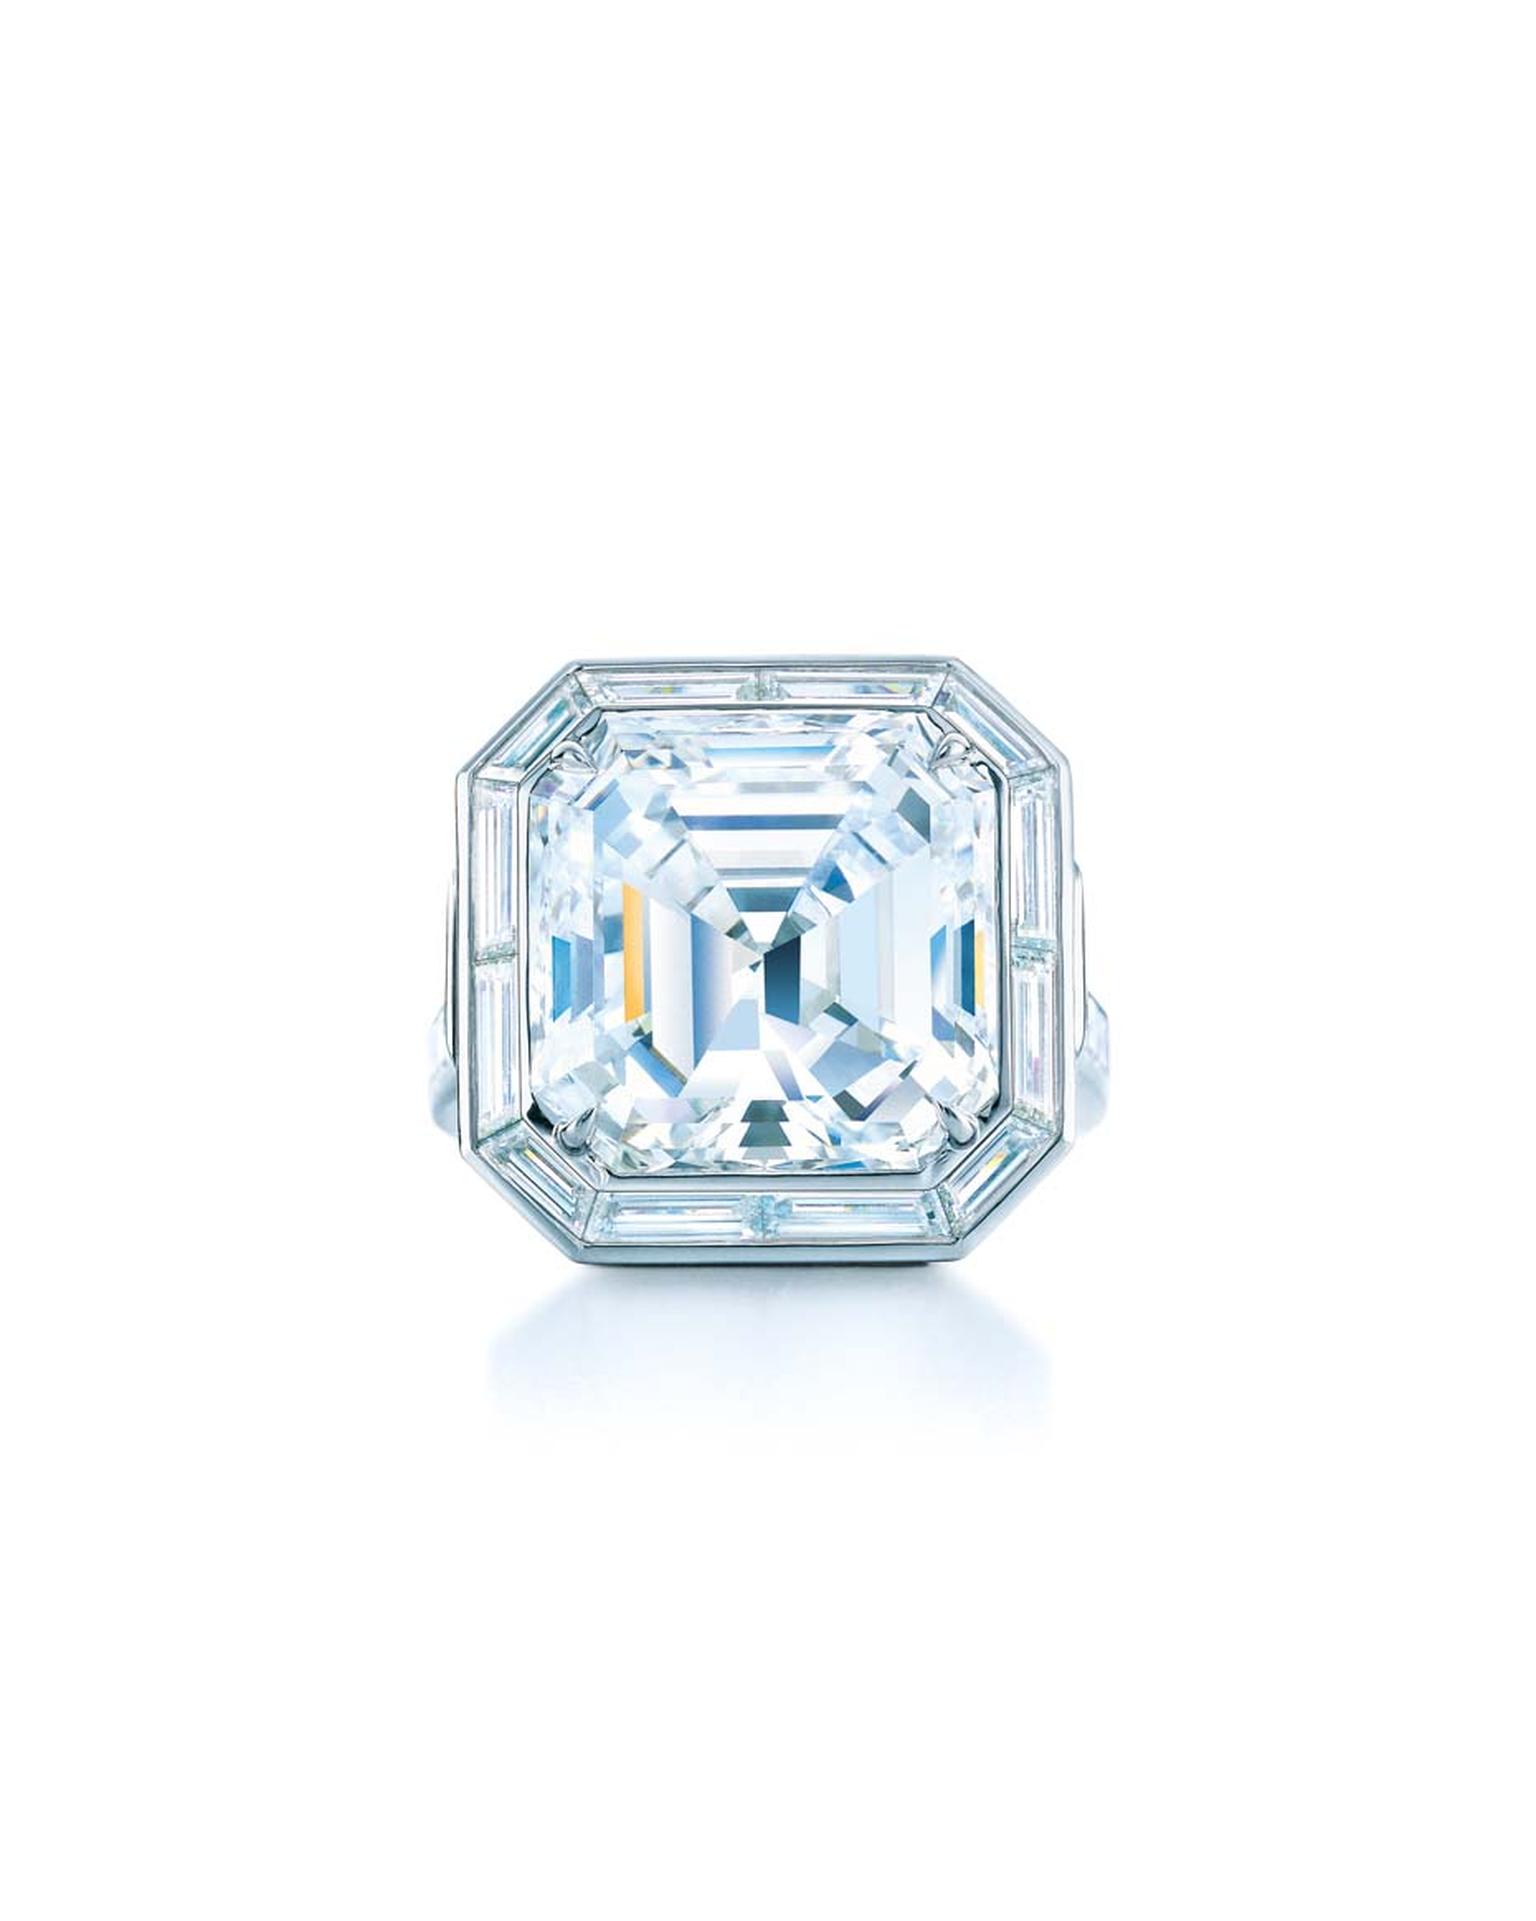 Tiffany & Co. emerald cut diamond engagement ring from their Blue Book collection.